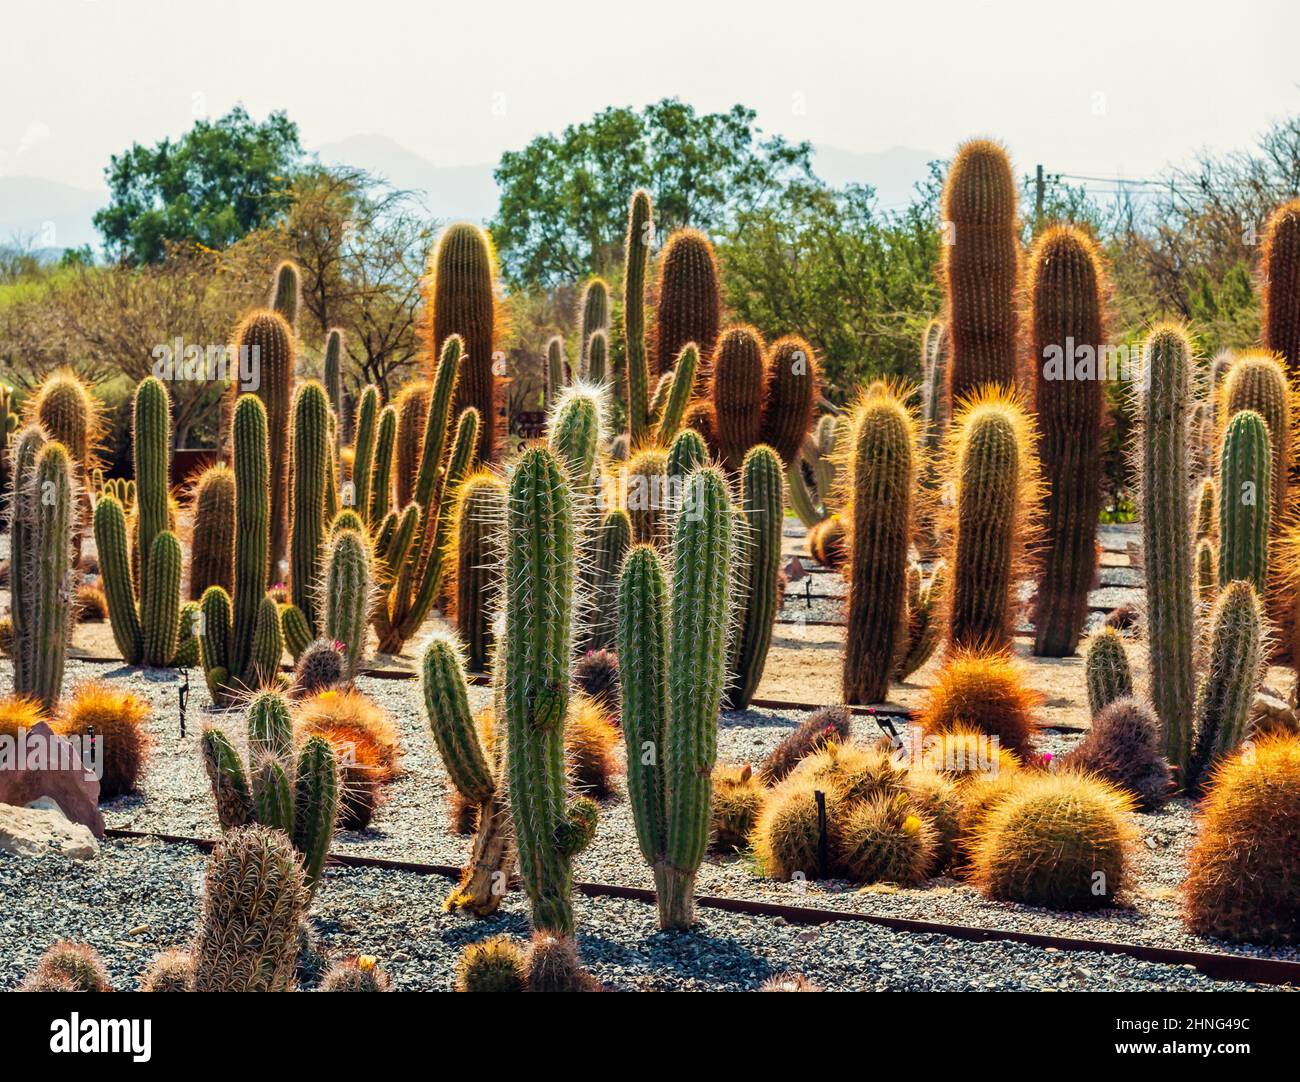 Various species of cactus at the Quilapilun park, Chile. Stock Photo